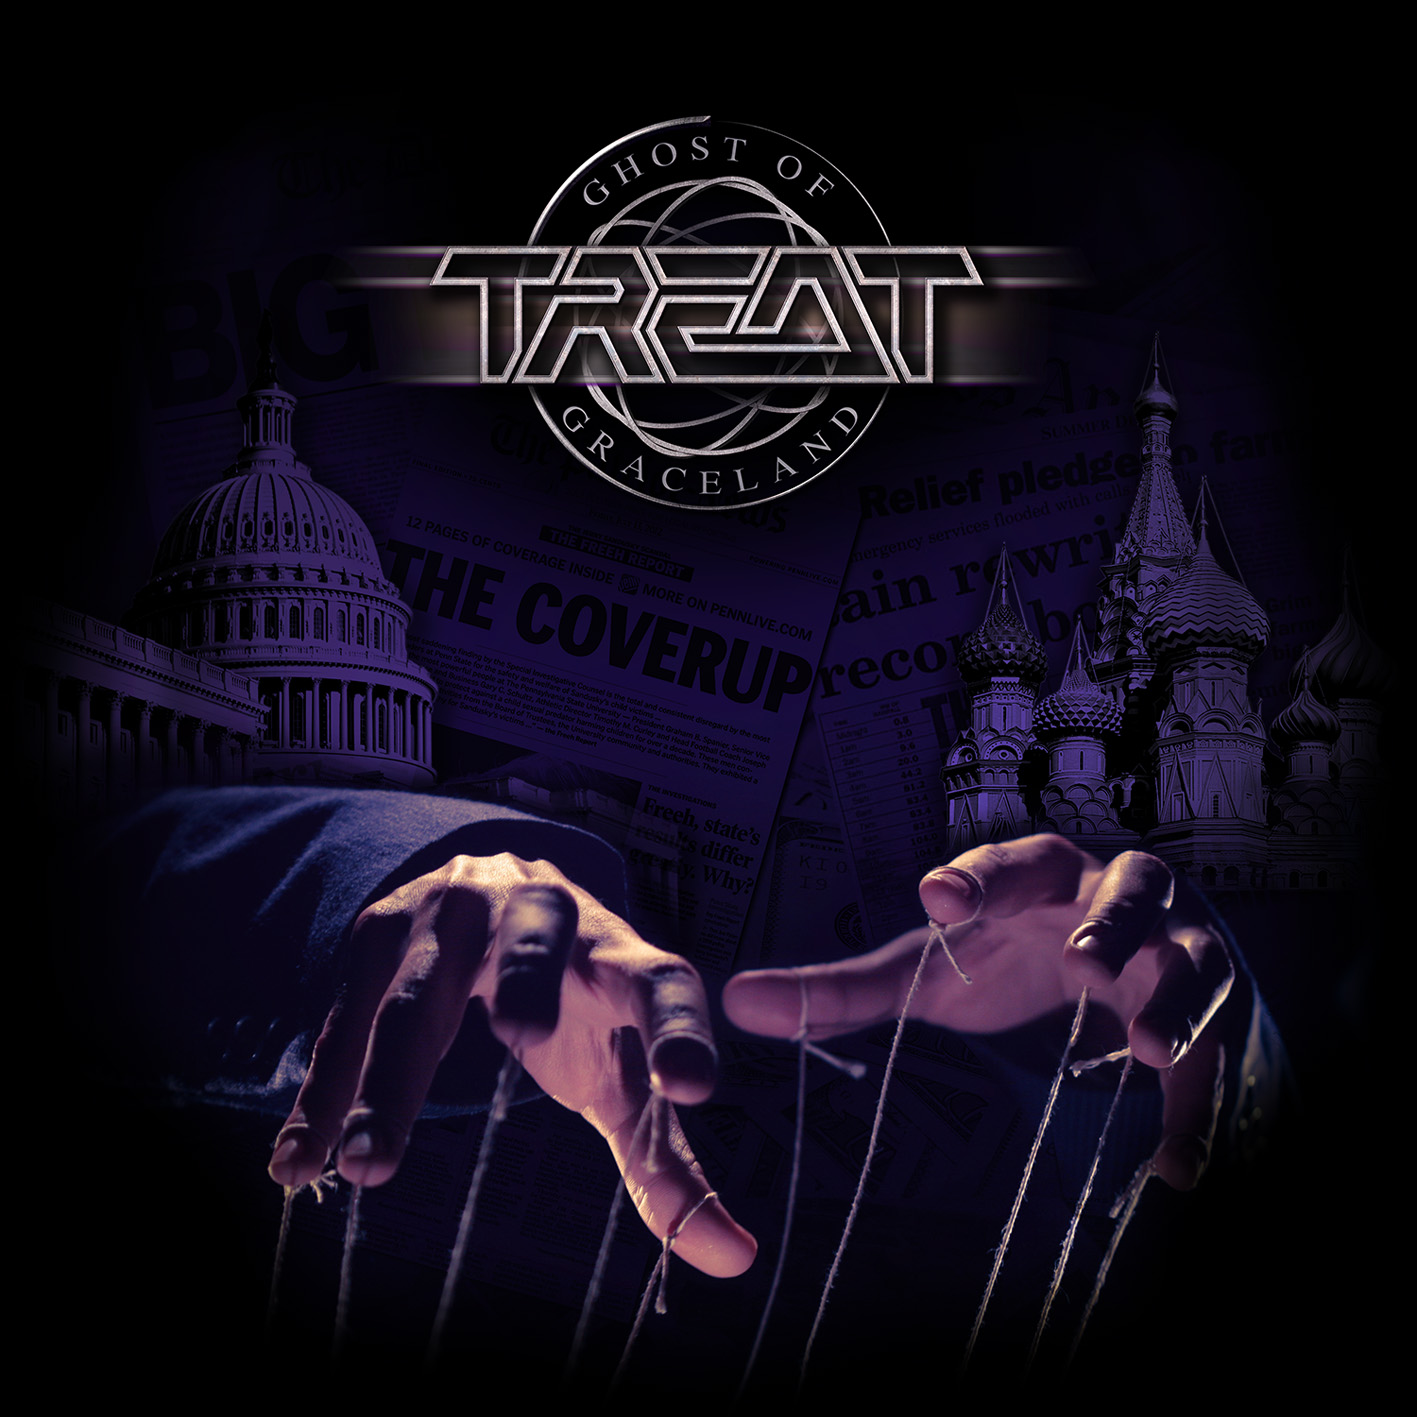 TREAT gog COVER